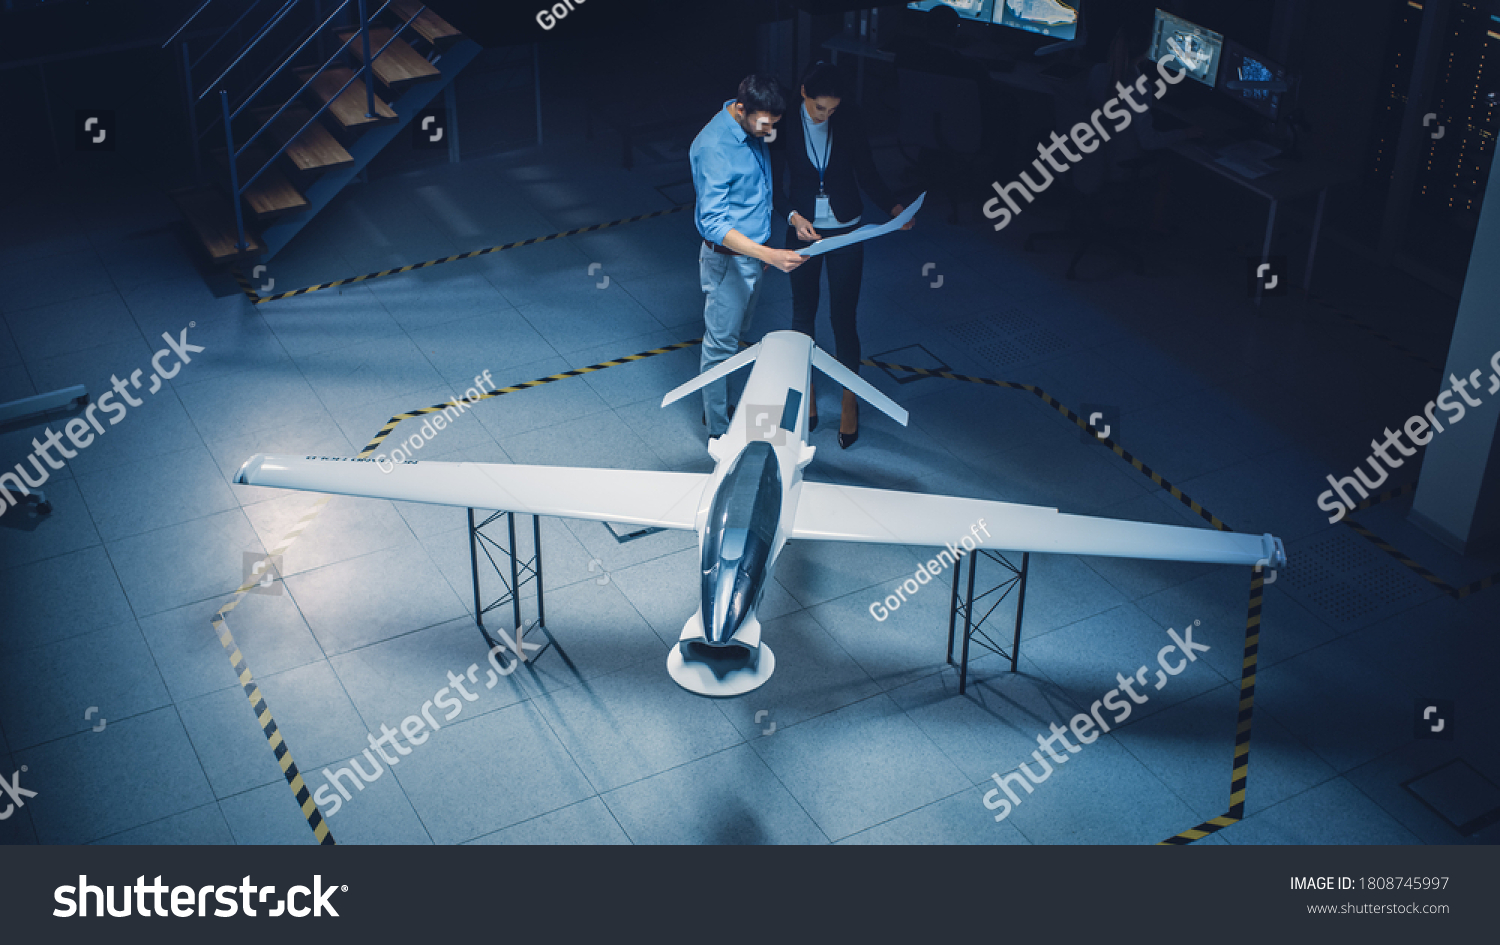 Meeting of Aerospace Engineers Work On Unmanned Aerial Vehicle / Drone Prototype. Aviation Experts have Discussion. Industrial Facility with Aircraft Capable of GPS Surveillance and Military Missions #1808745997